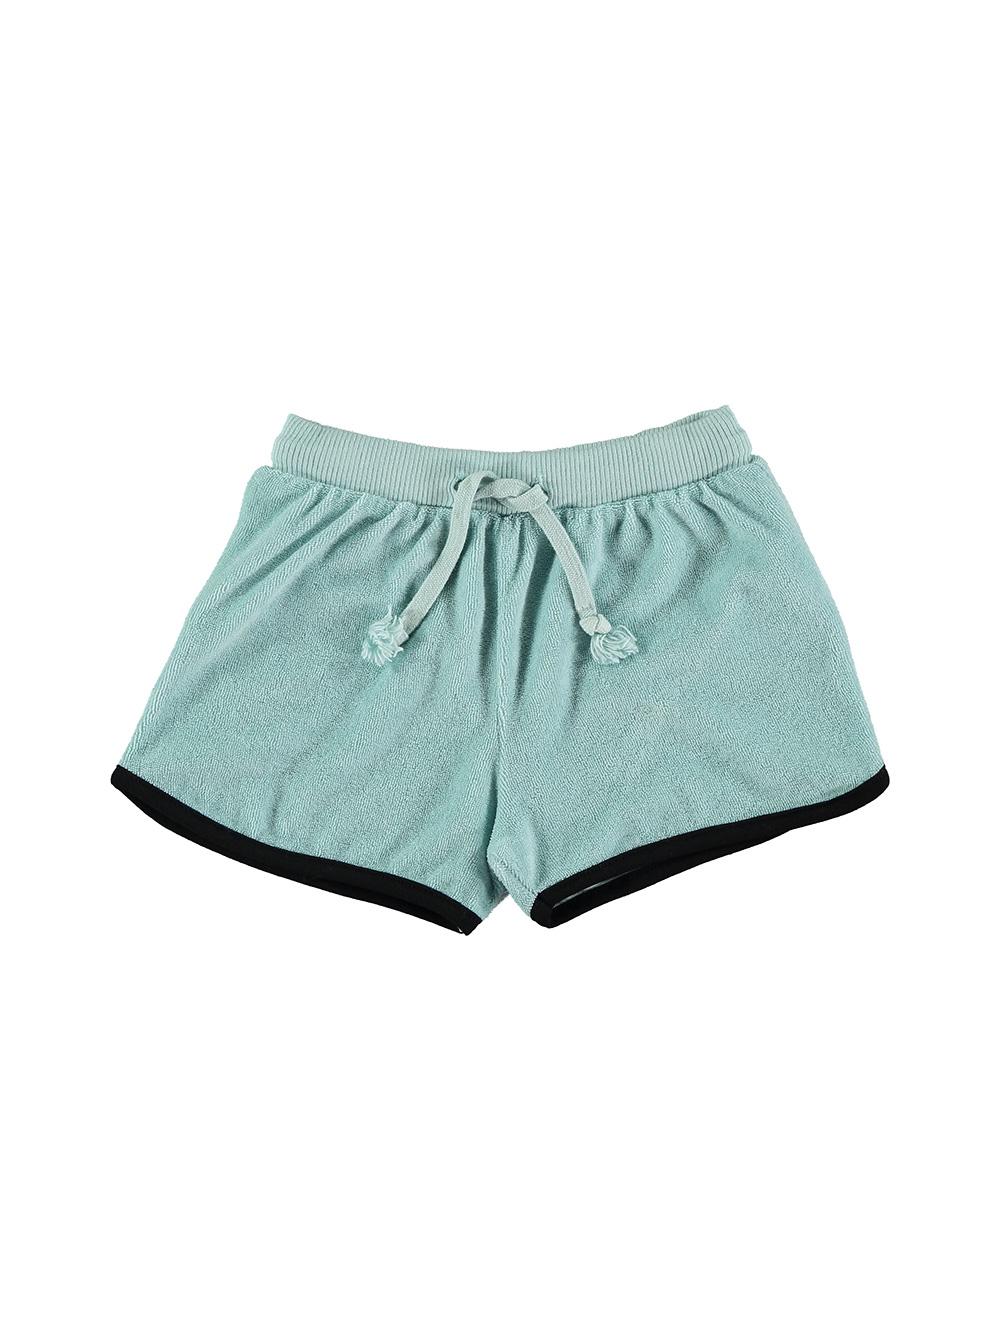 LIGHT BLUE SHORTS WITH DRAWSTRING AND BLACK TIP